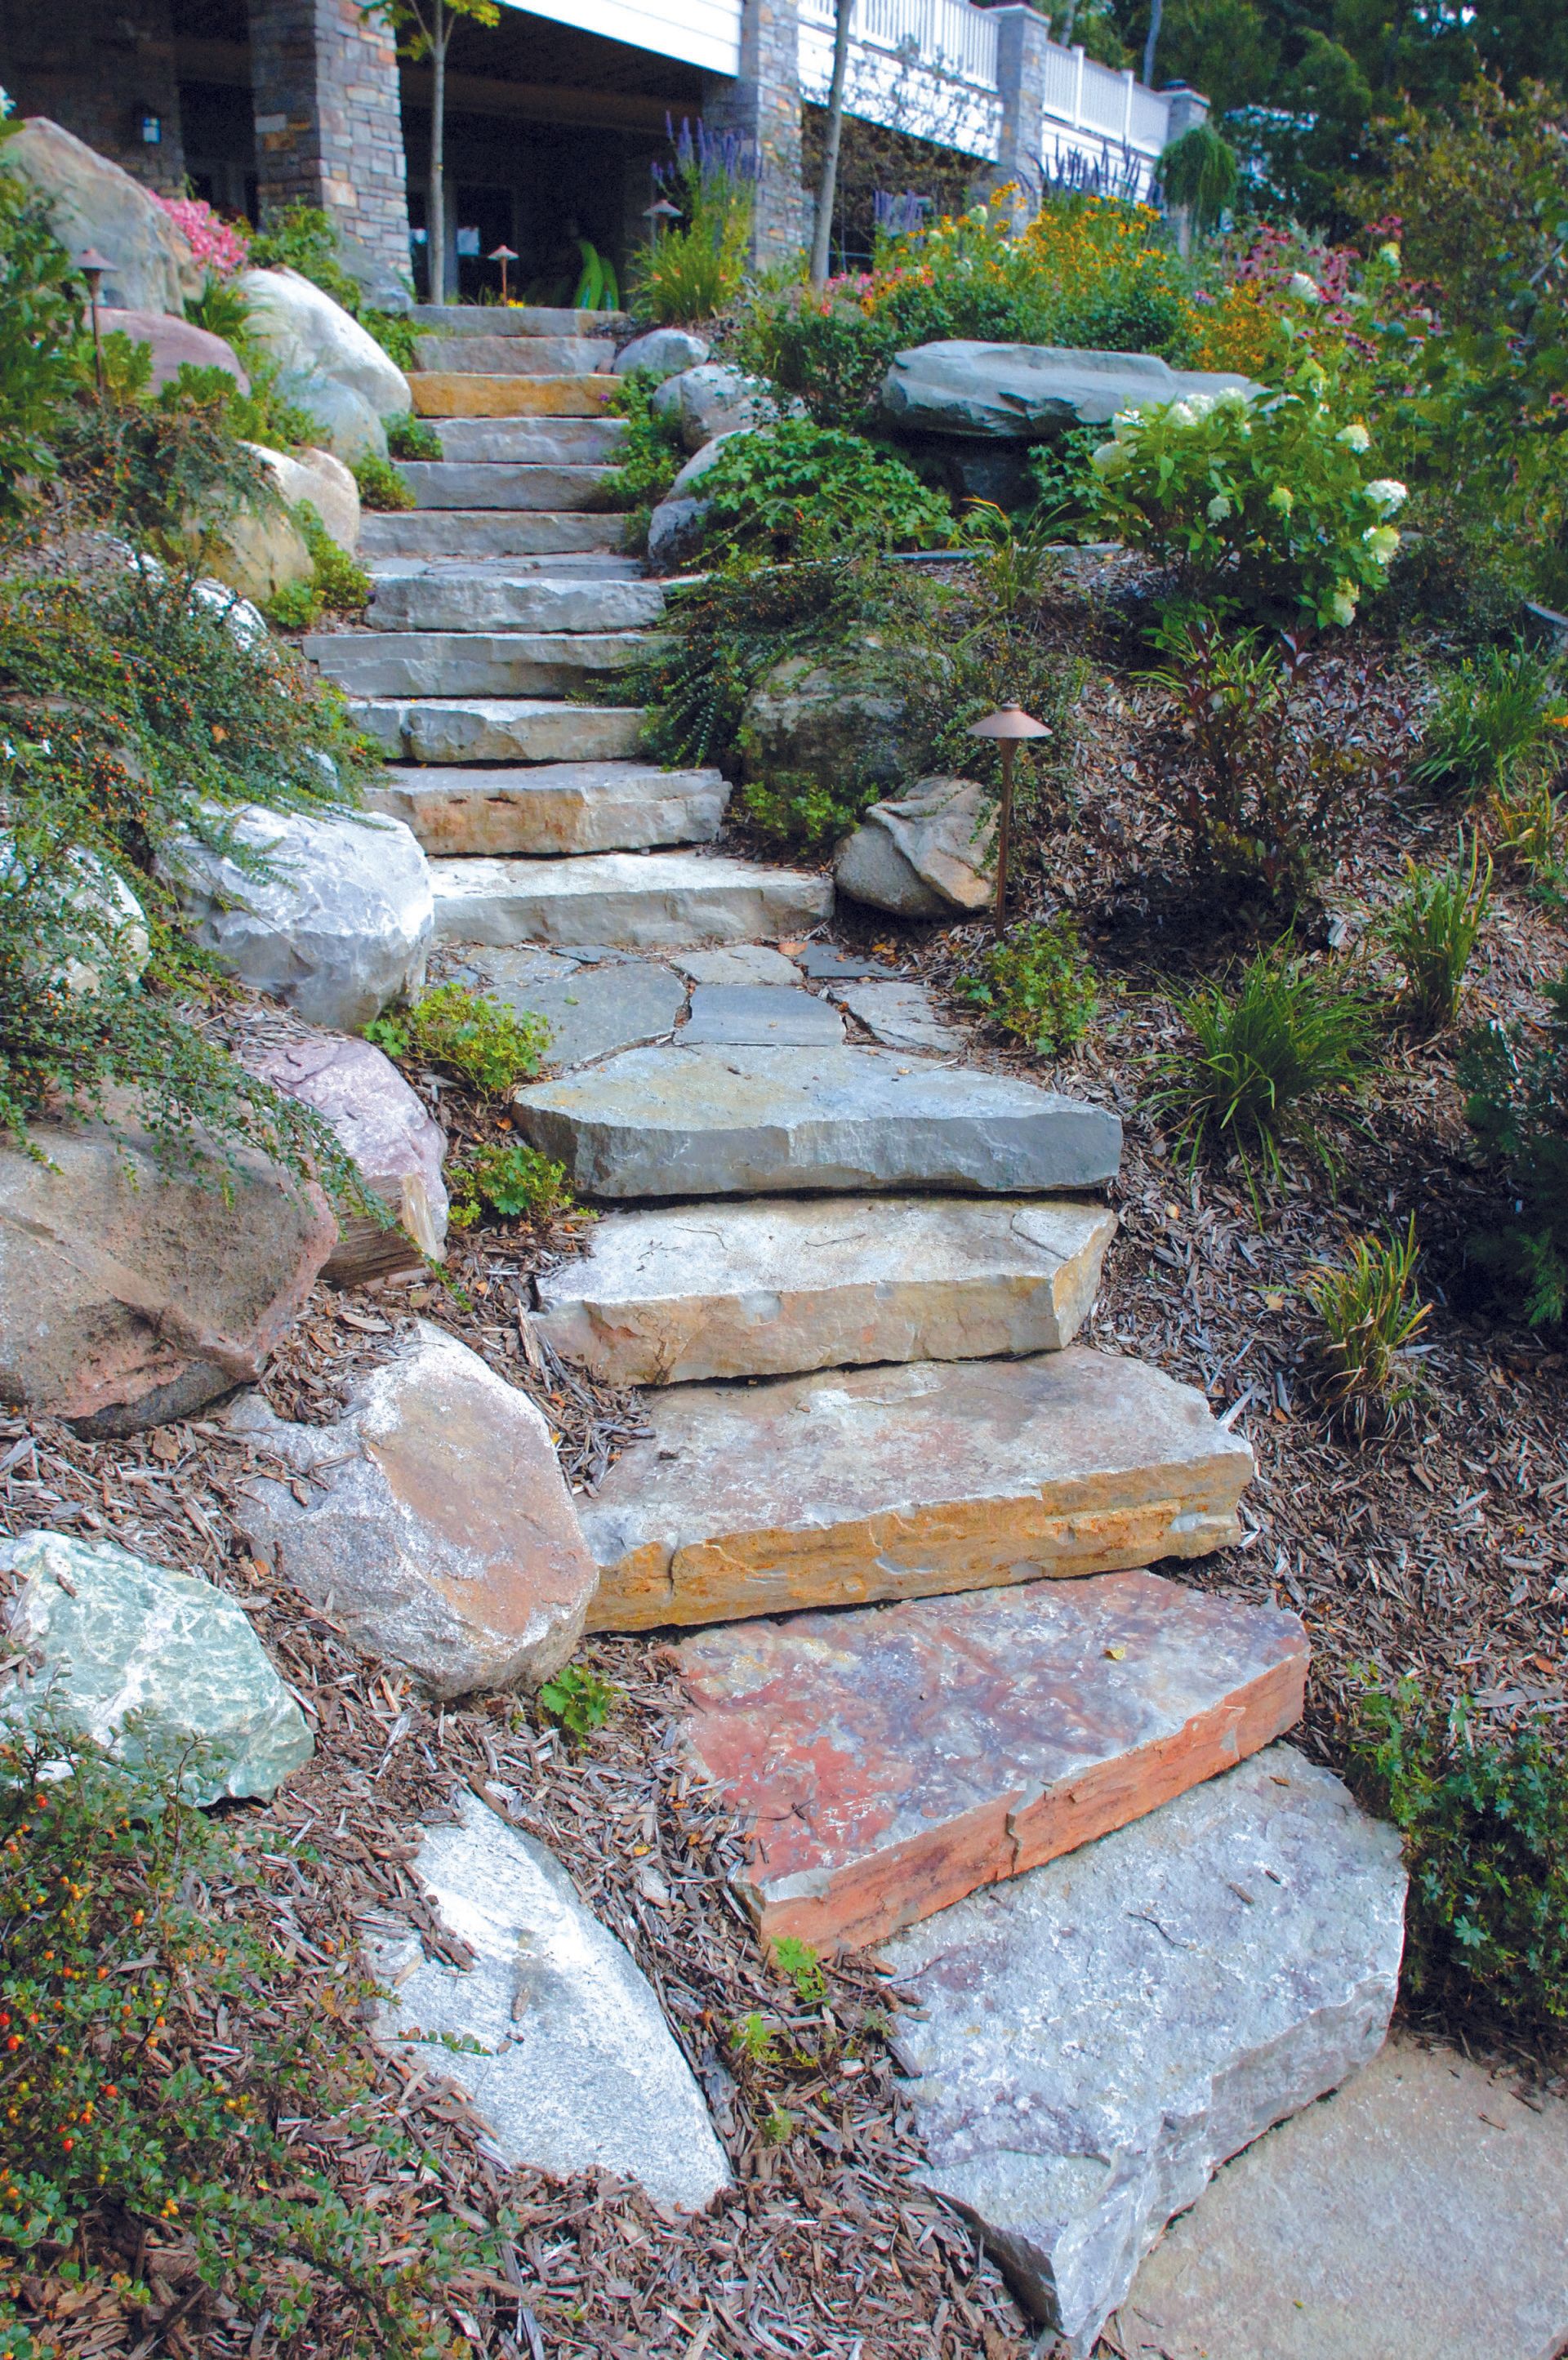 A set of stone stairs leading up to a house surrounded by rocks and plants.